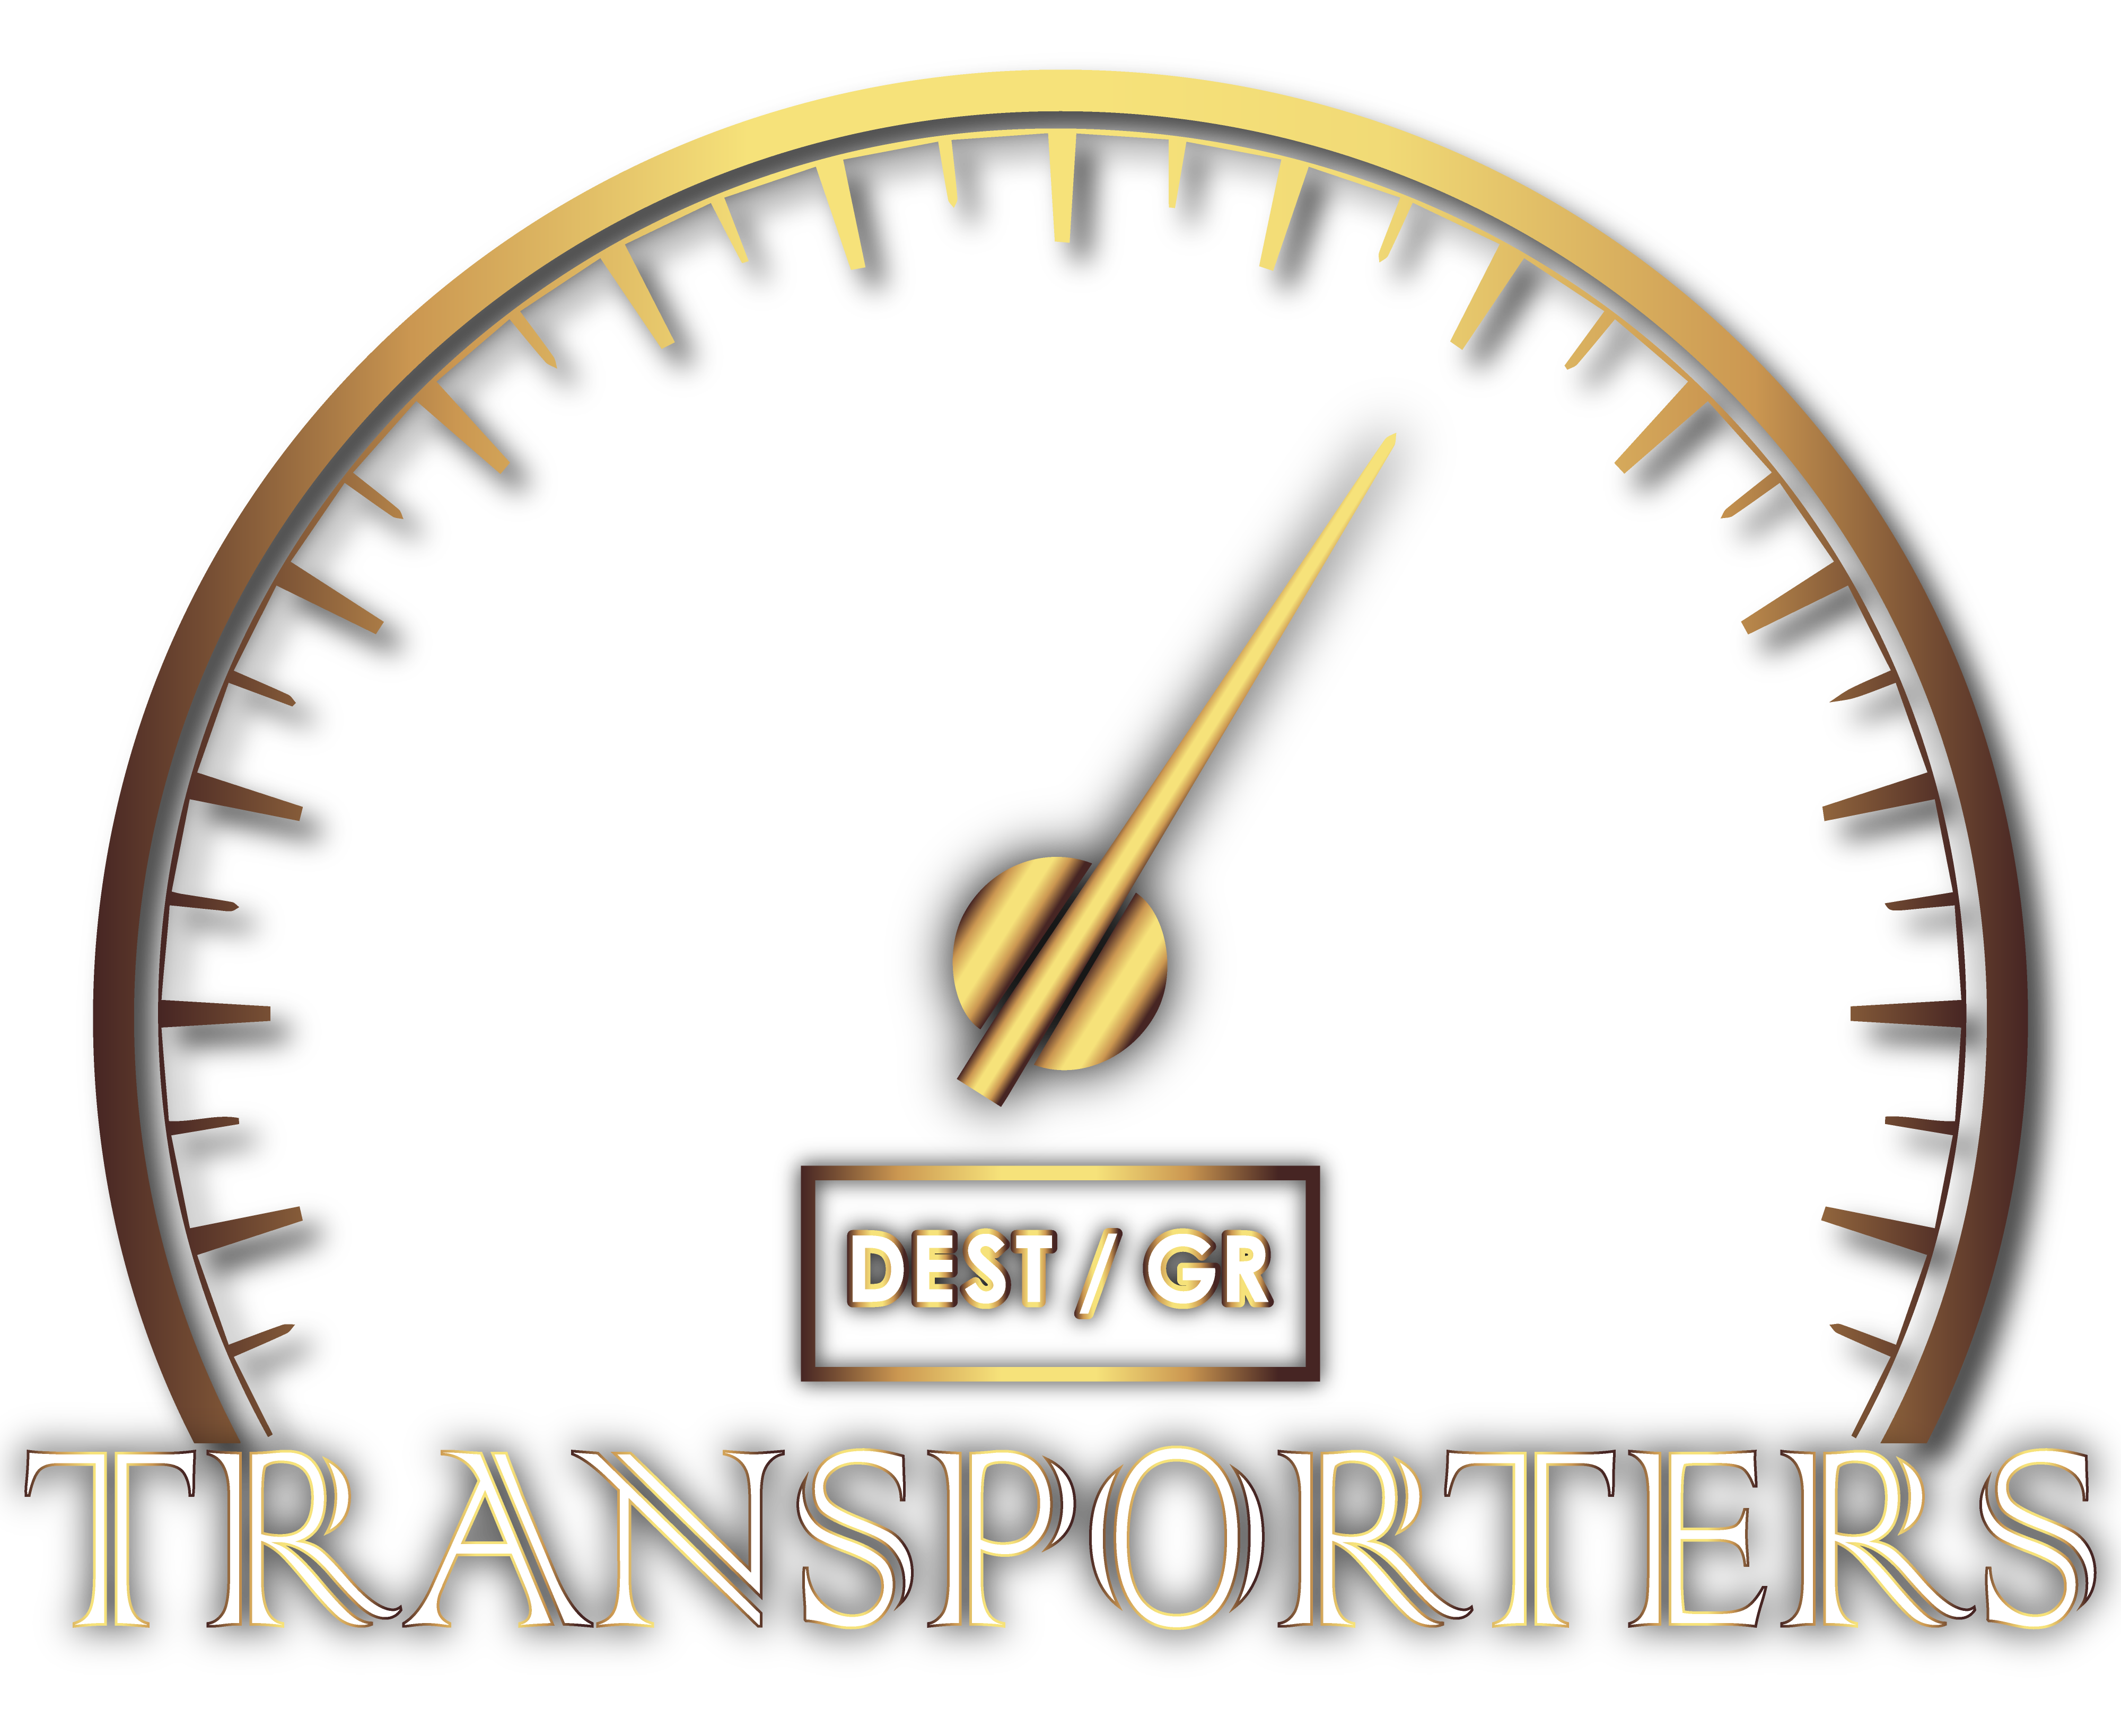 Transporters | Search results - Transporters